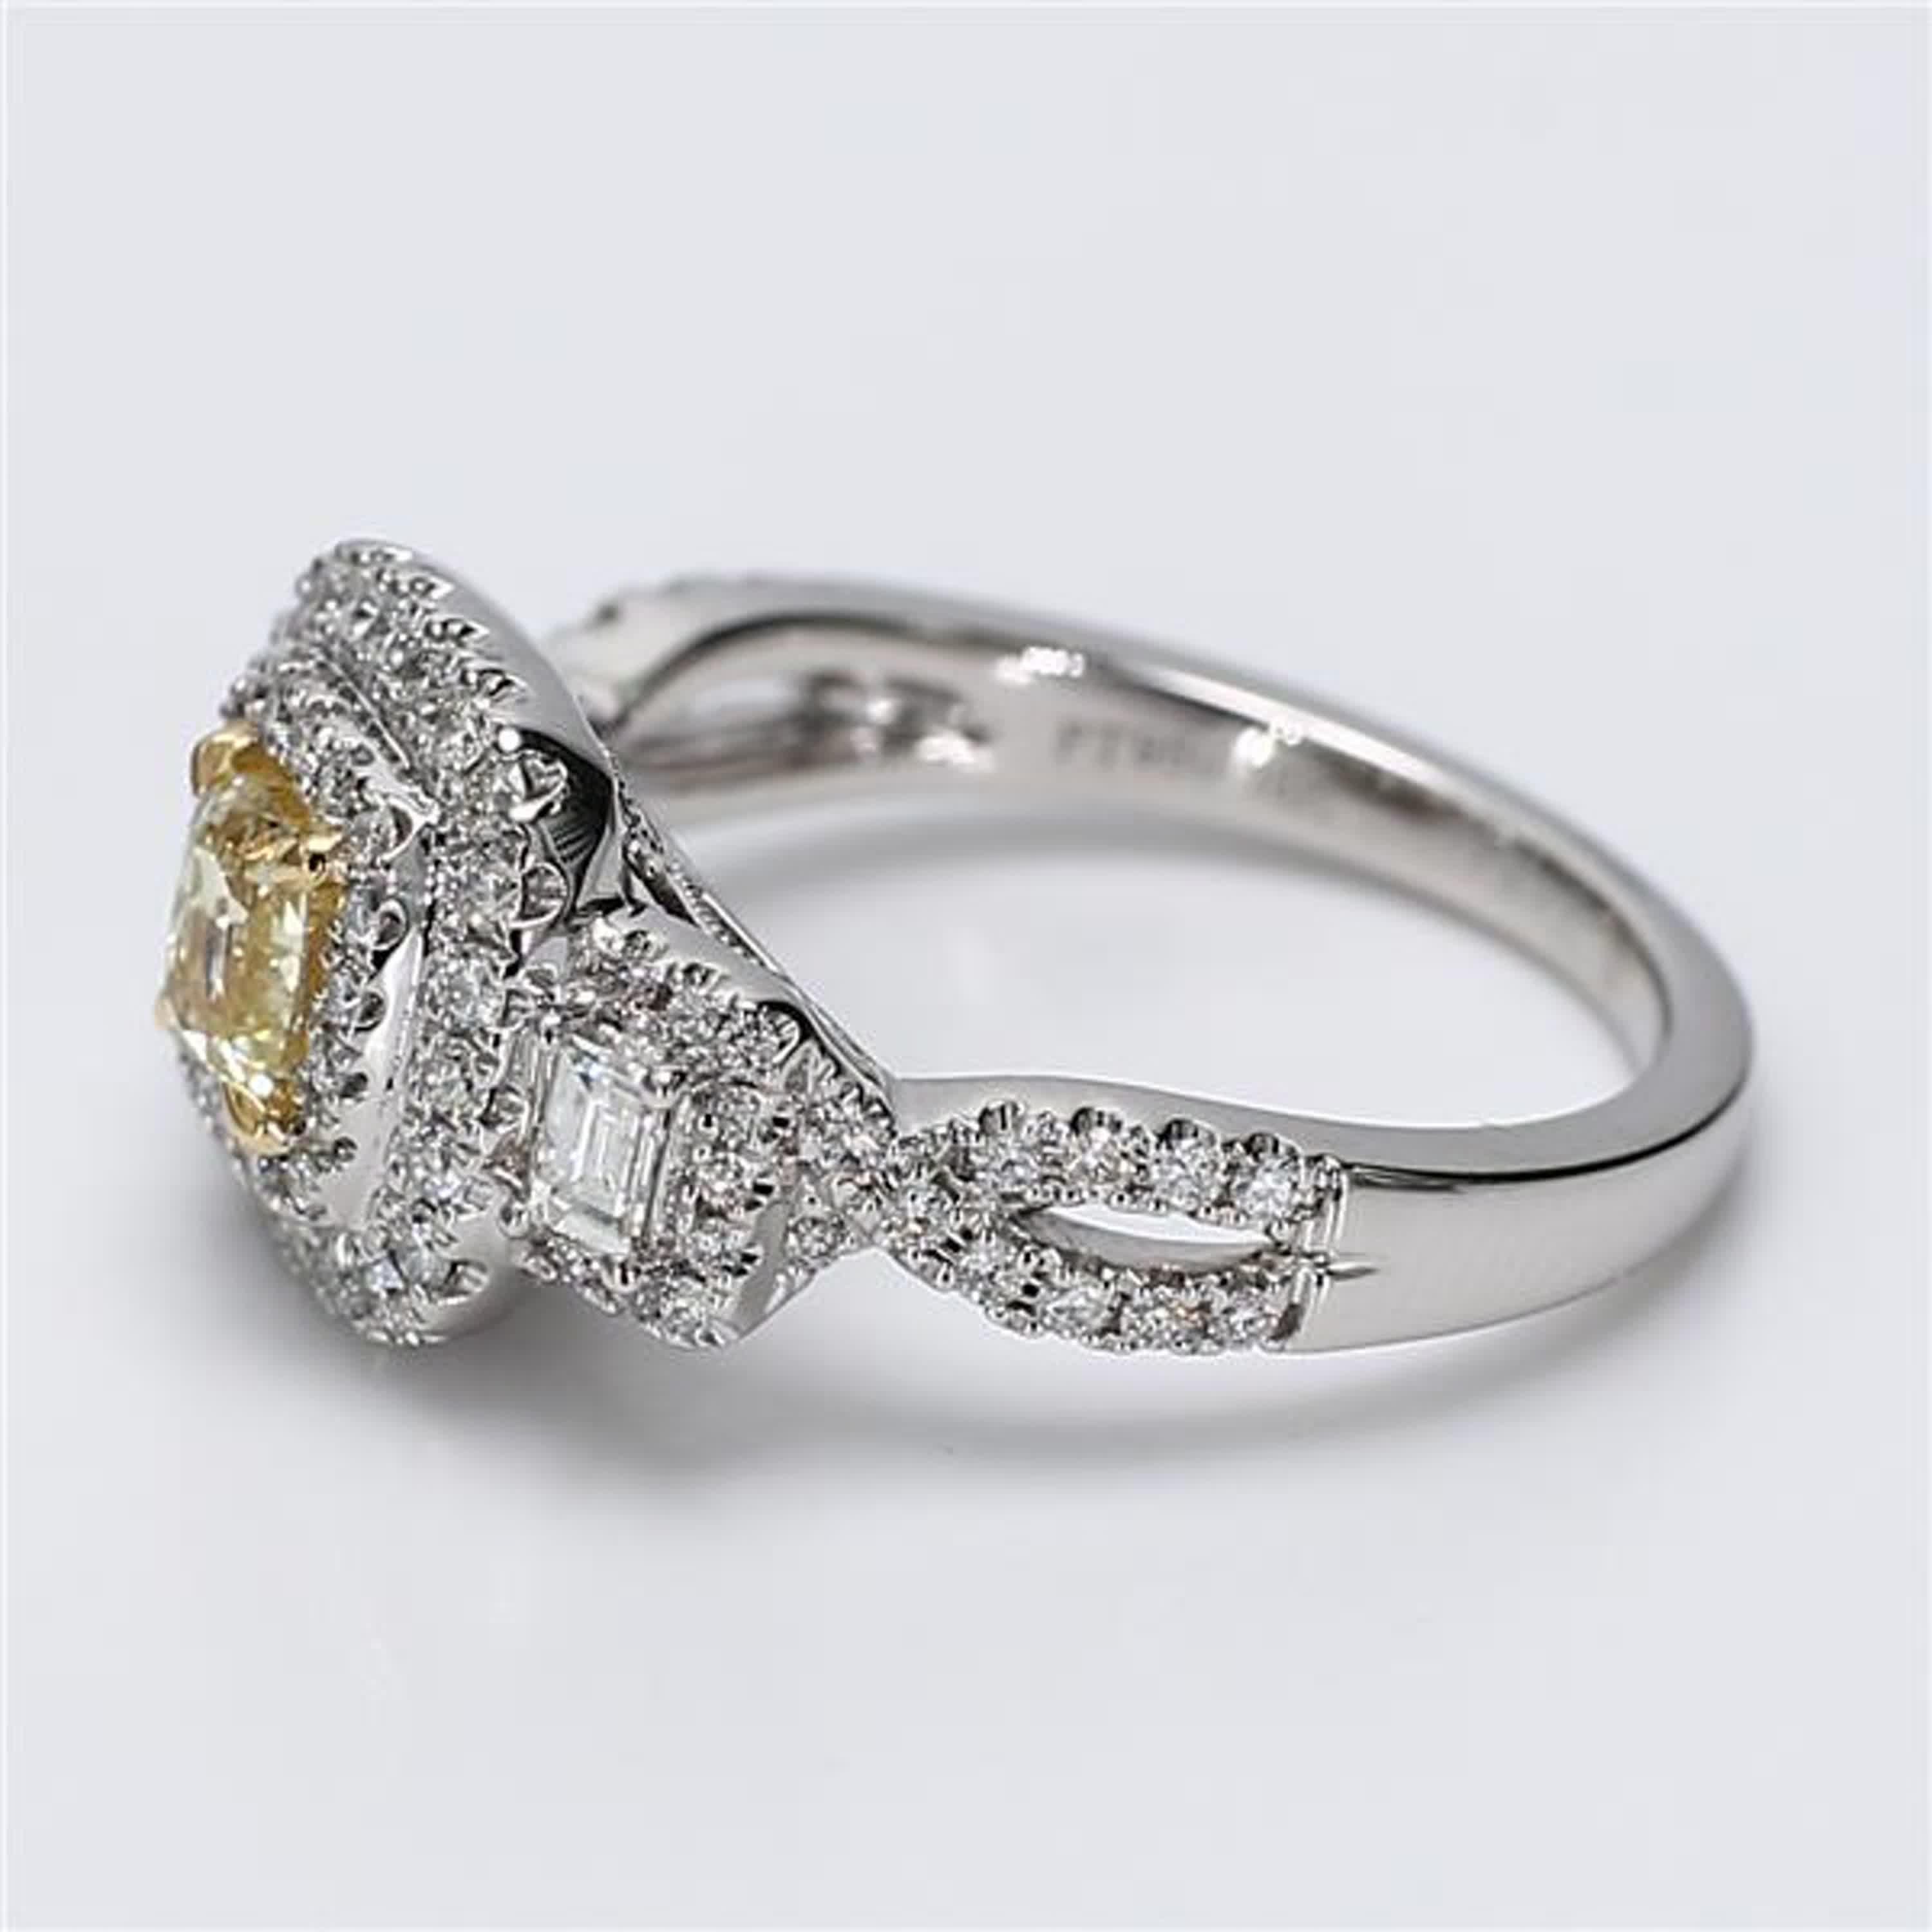 Contemporary Natural Yellow Cushion and White Diamond 1.26 Carat TW Gold Cocktail Ring